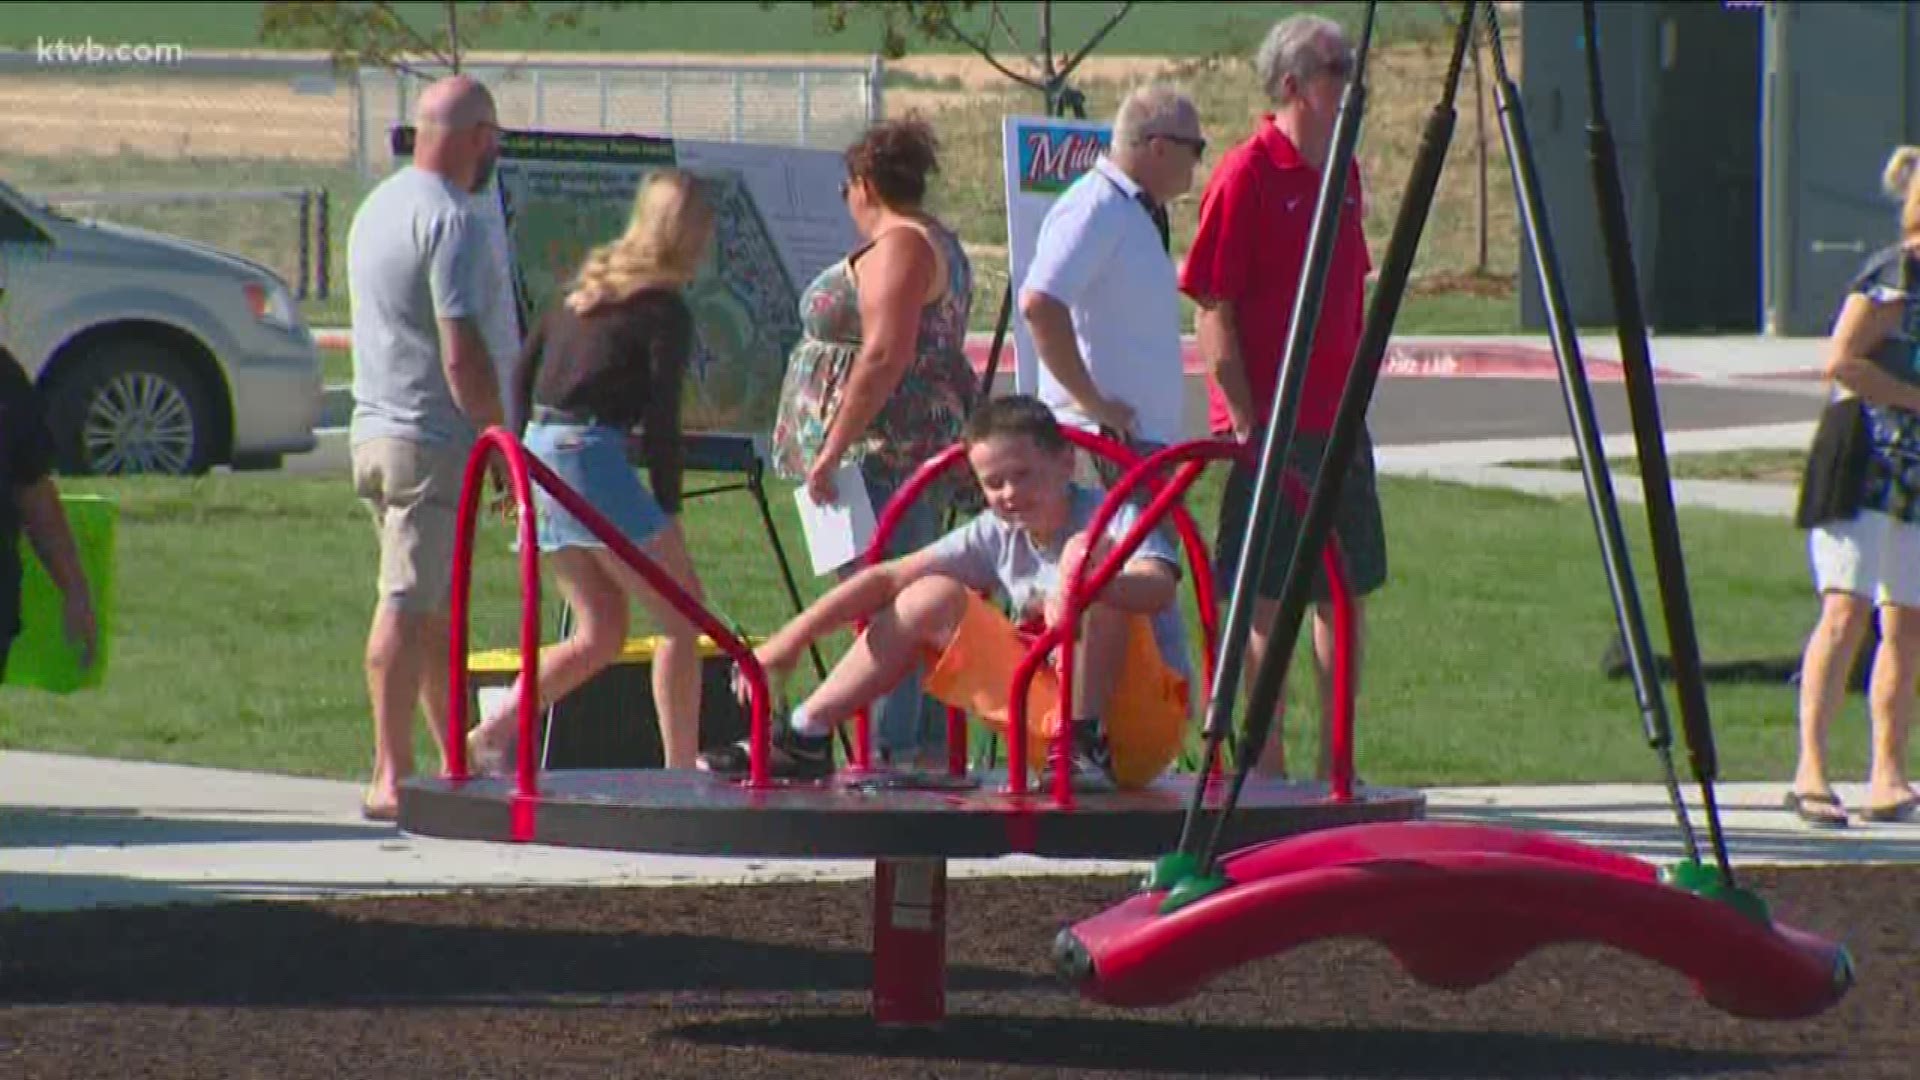 The park features a giant playground, six pickleball courts, and four baseball fields. The City of Nampa will soon be adding more baseball fields, soccer fields, and picnic areas.